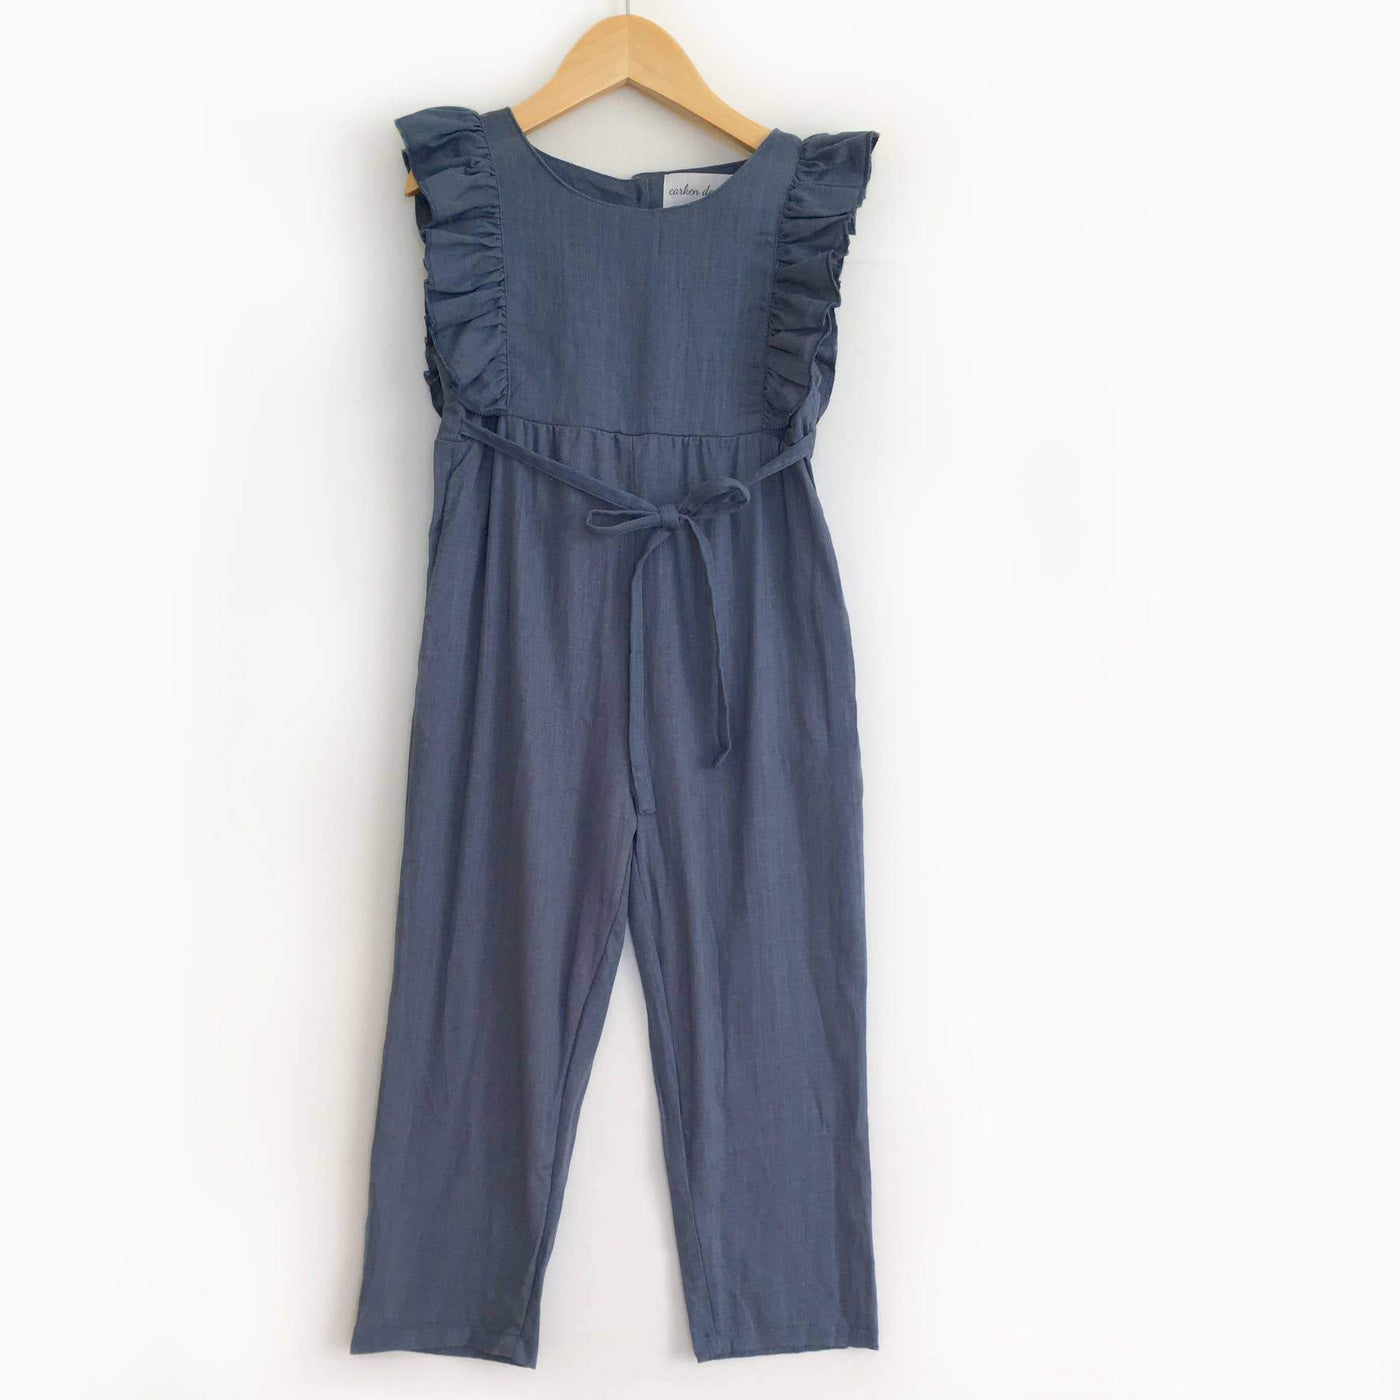 Navy Blue Linen Ruffle Romper with Pants-G Romper-Graceful & Chic Boutique, Family Clothing Store in Waxahachie, Texas